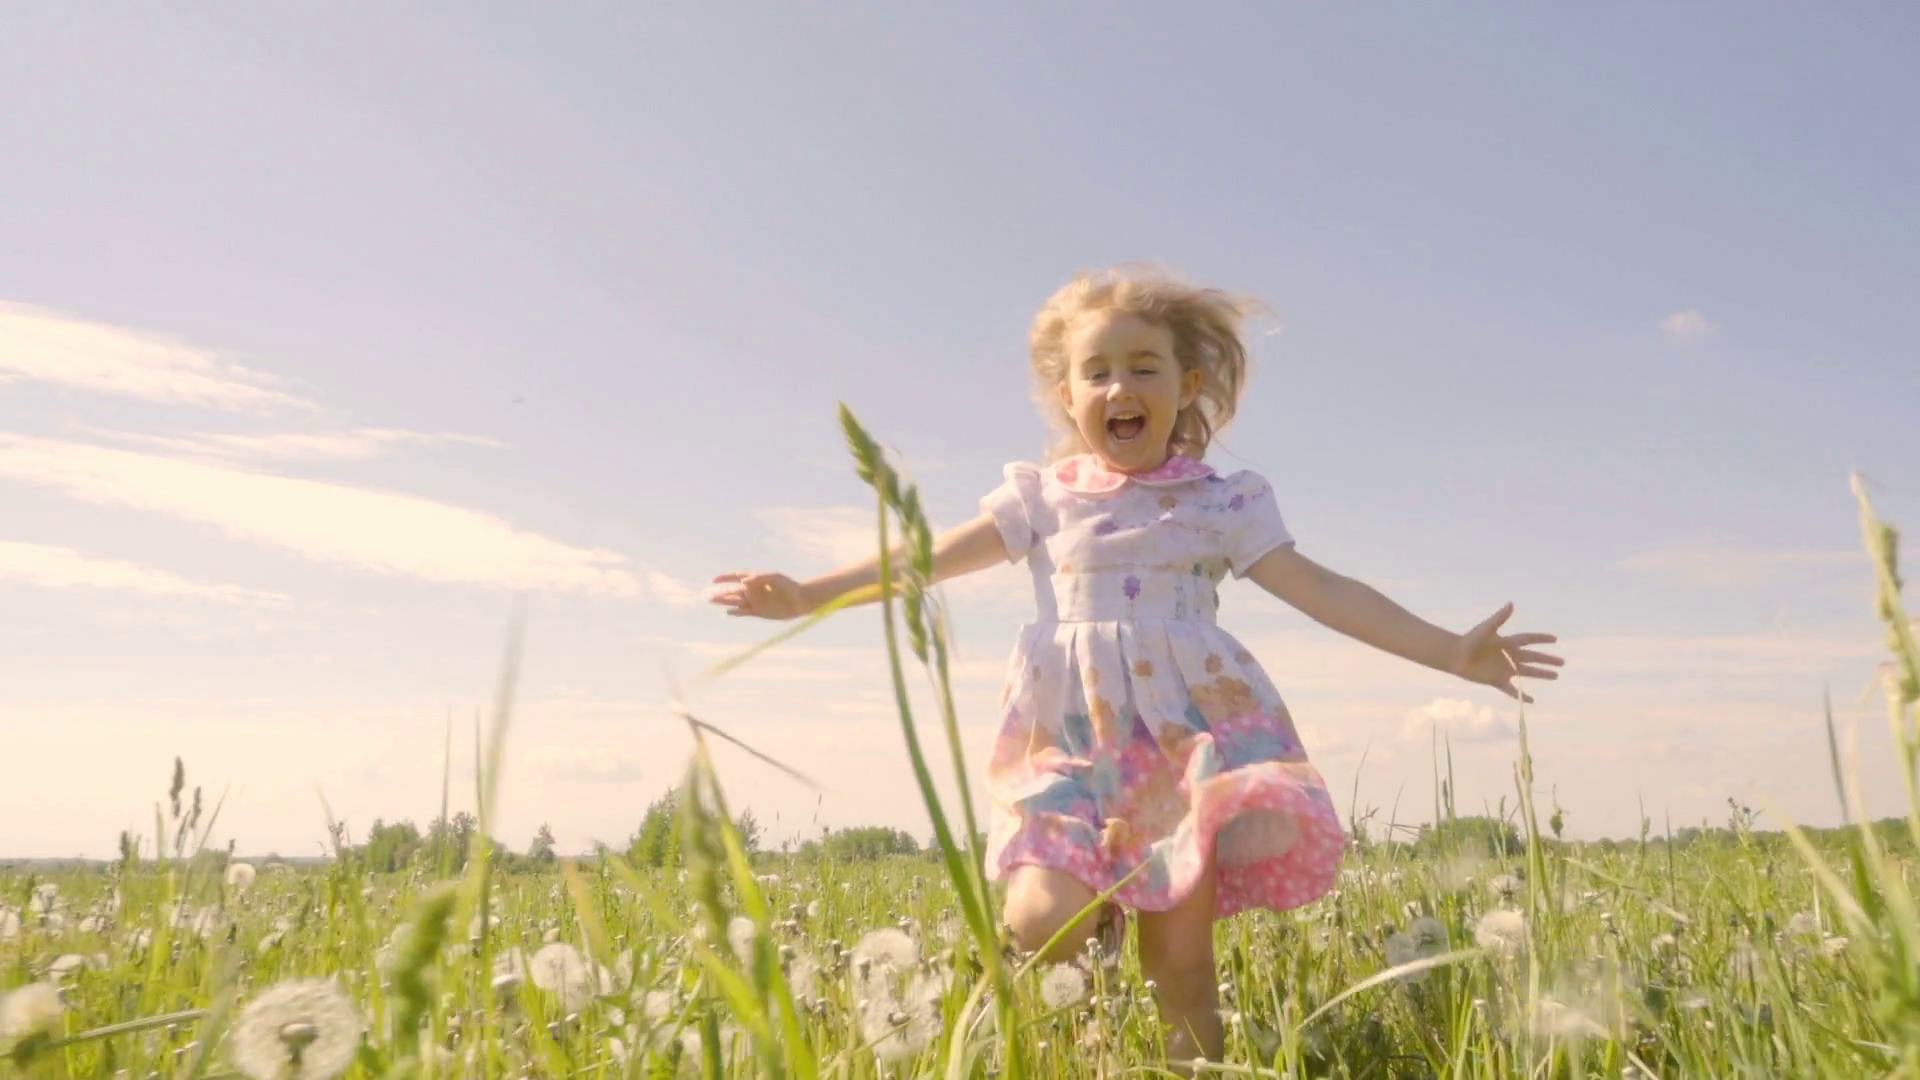 Cute little girl running in a meadow in the colors of a dandelion ...